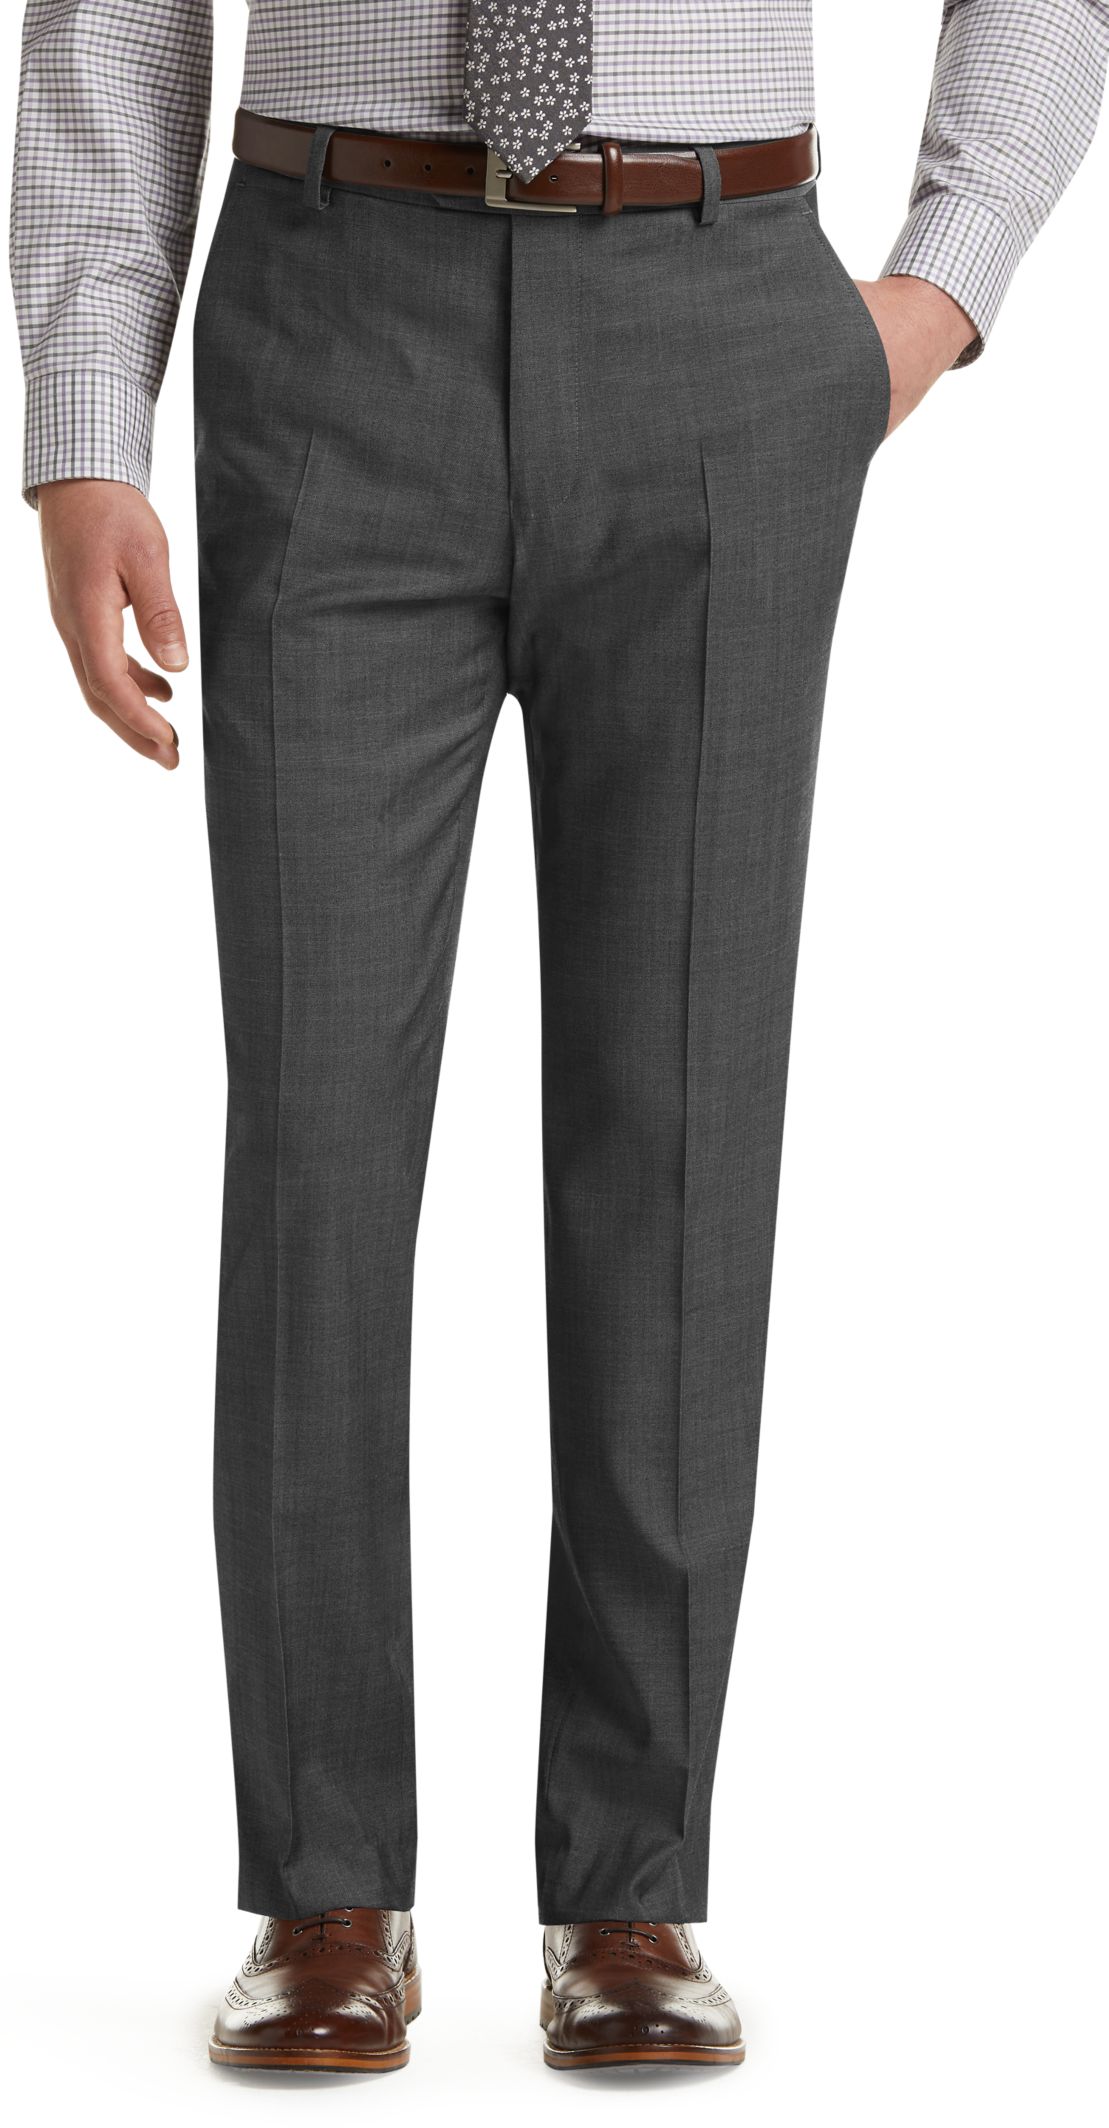 Travel Tech Slim Fit Flat Front Pants CLEARANCE - All Clearance 